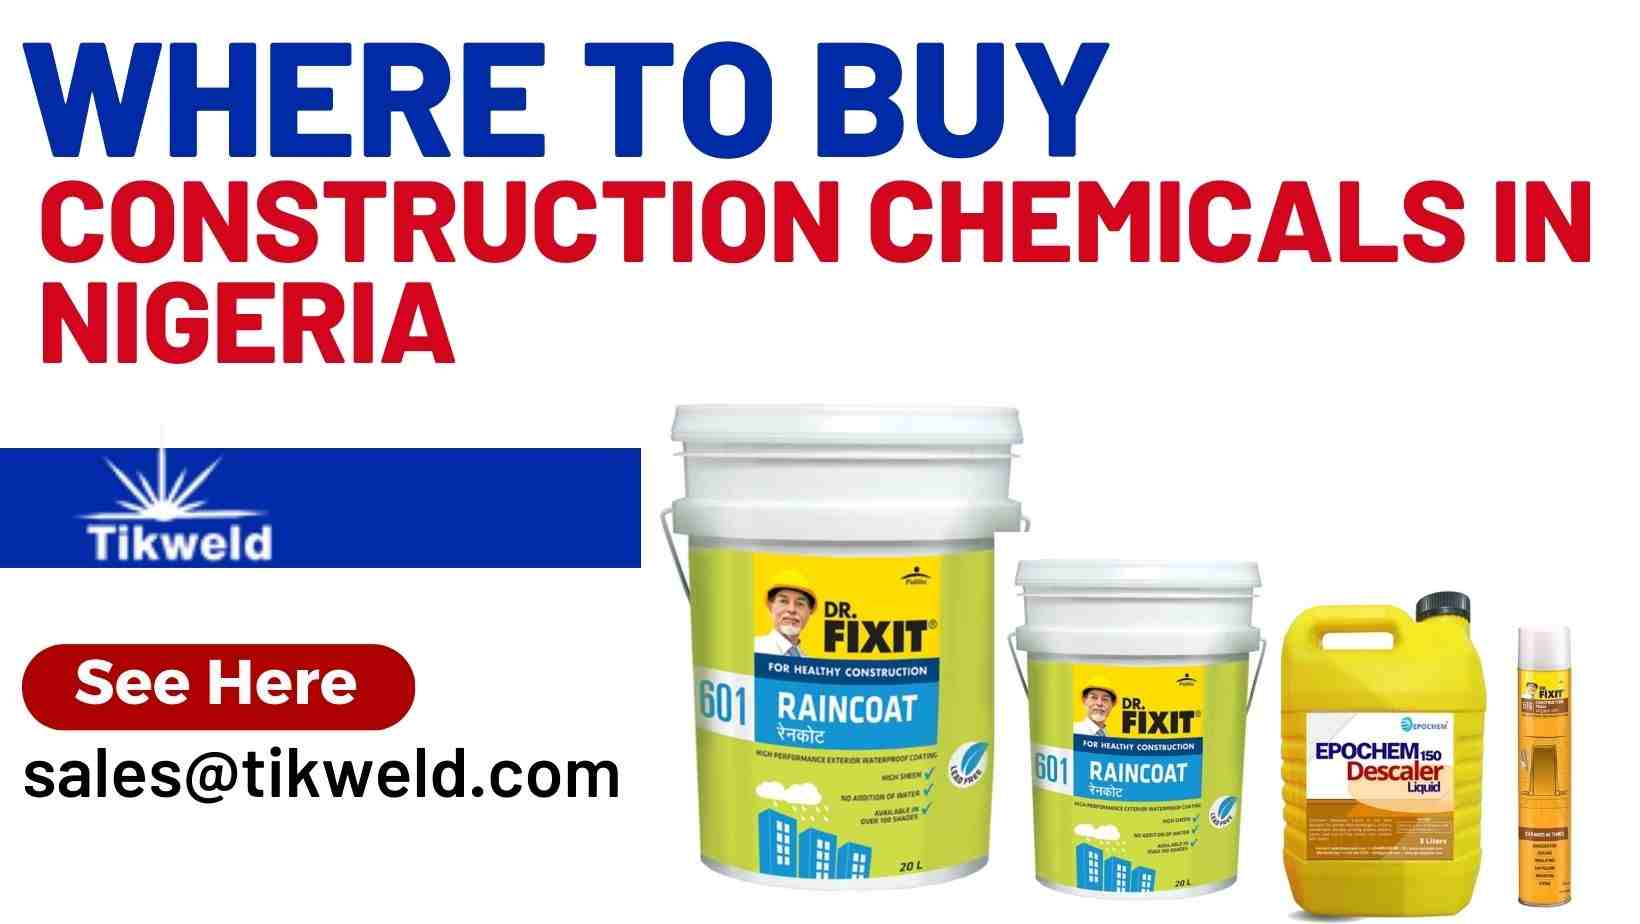 Costar Tile Fix 30F - Home of Construction Chemicals and Waterproofing